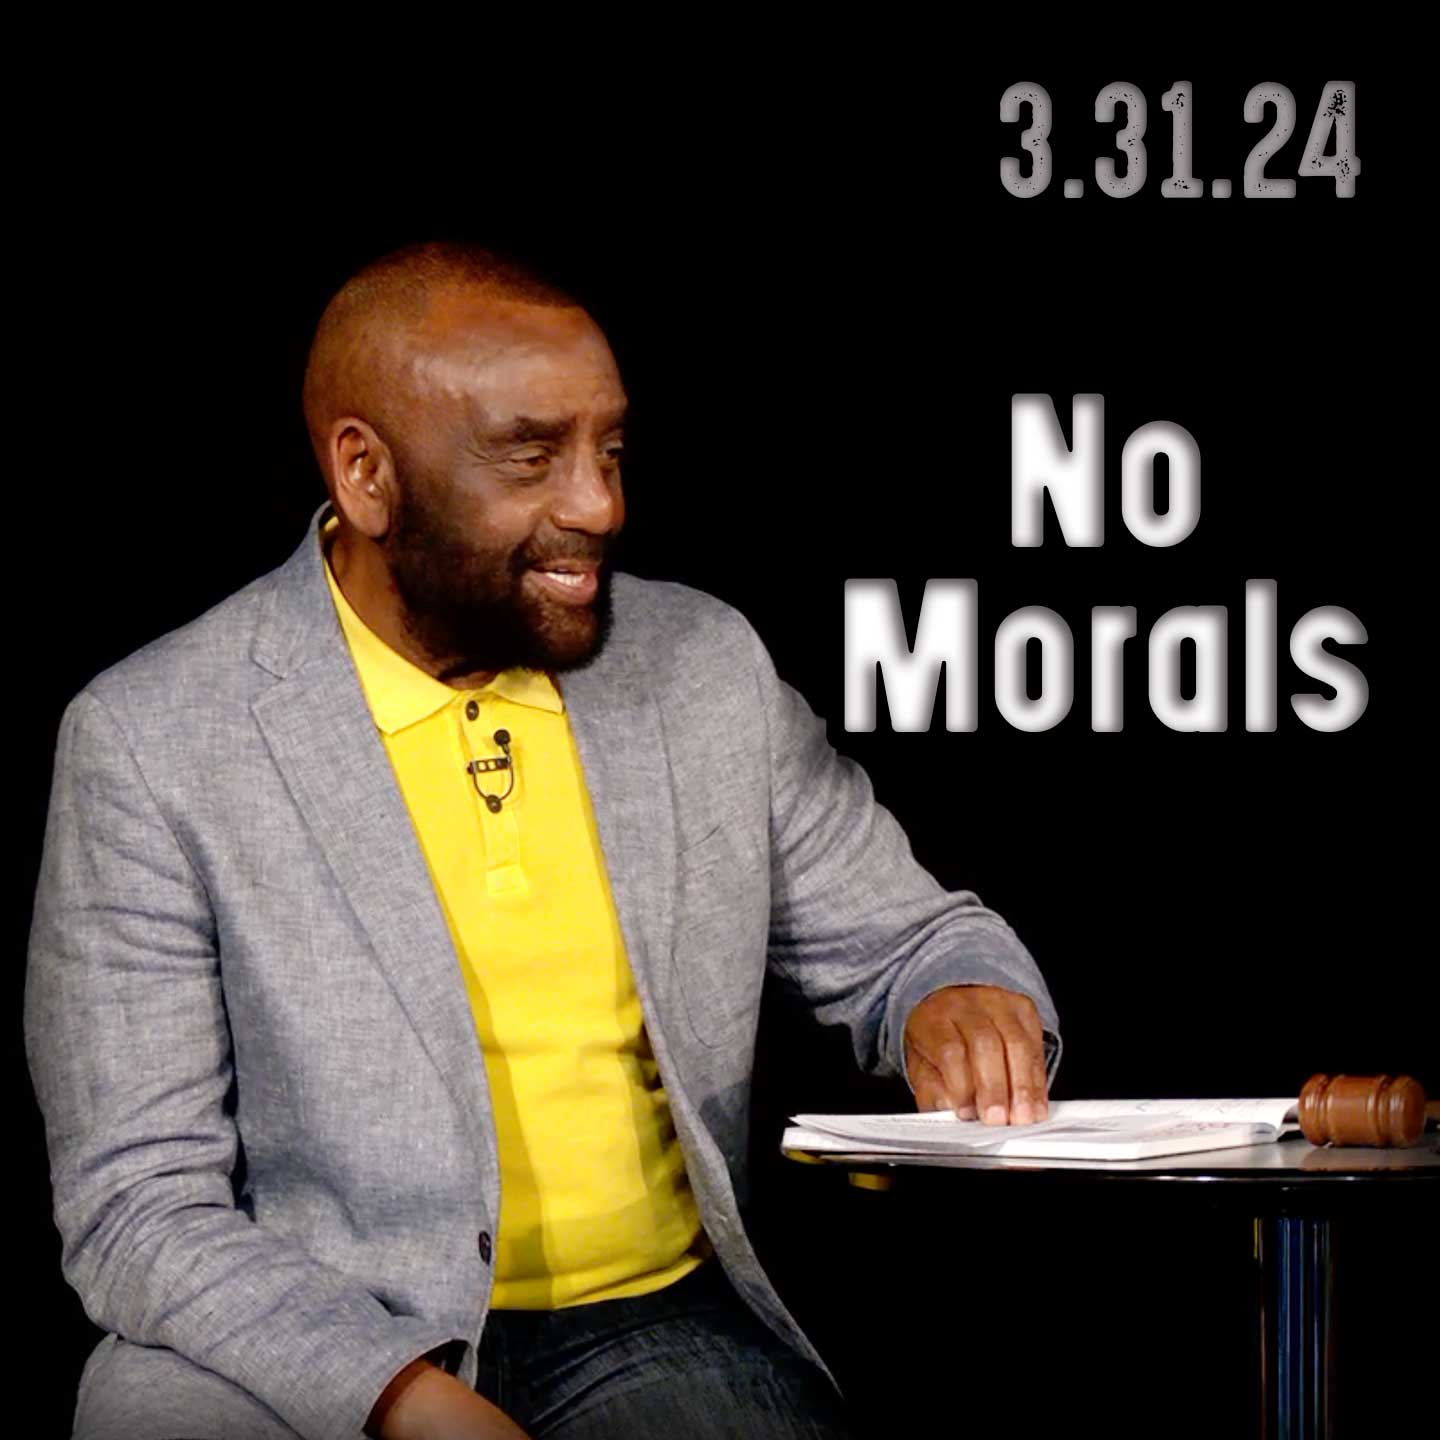 No one has morals and values (Easter Service) Church 3/31/24